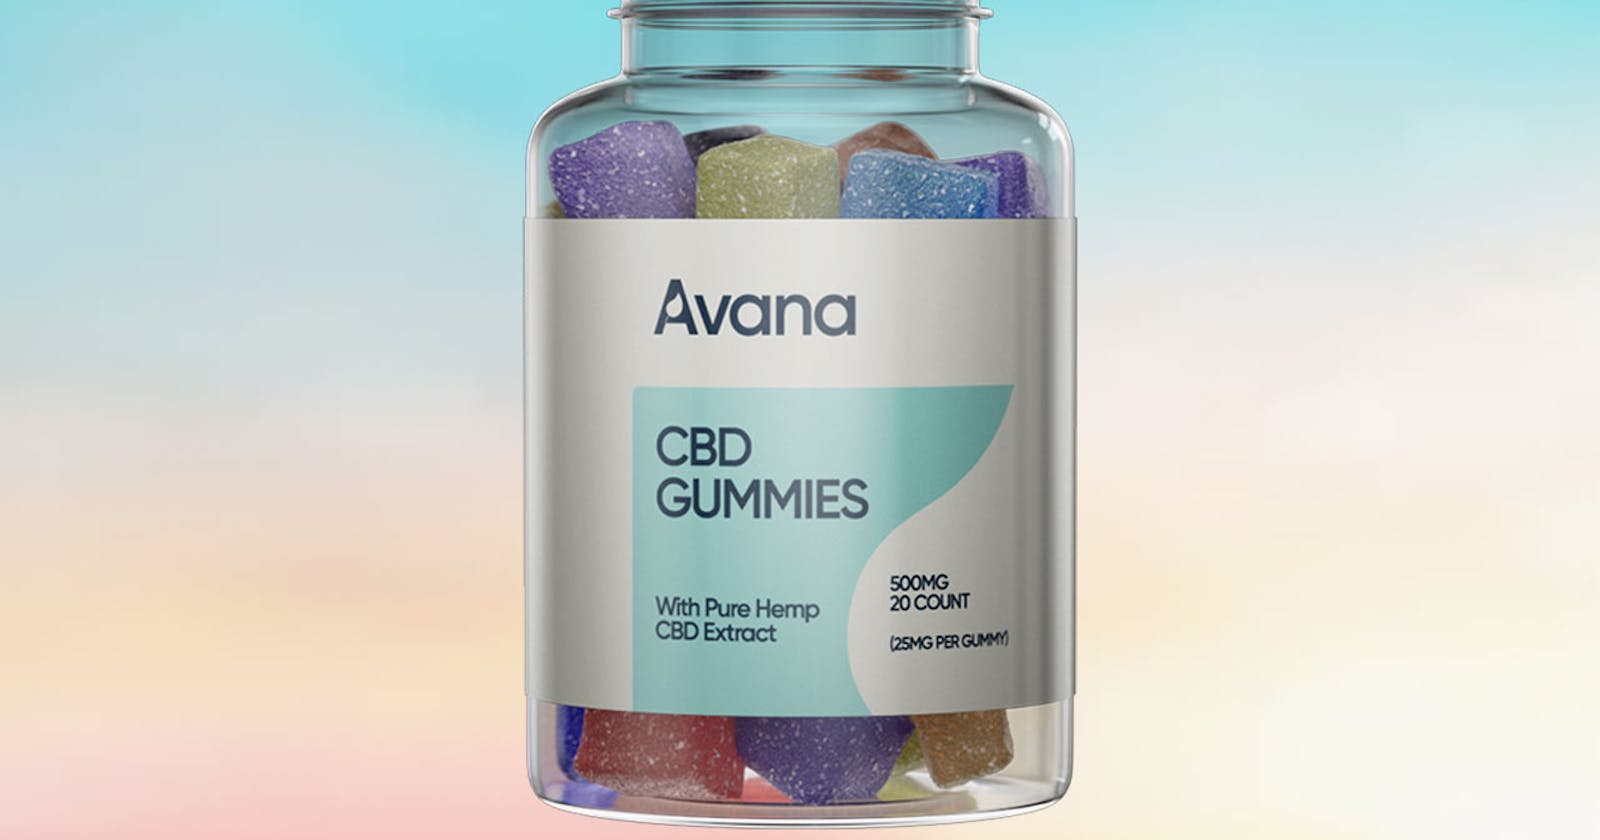 Avana CBD Gummies - Effective Product Good For You, Where To Buy!